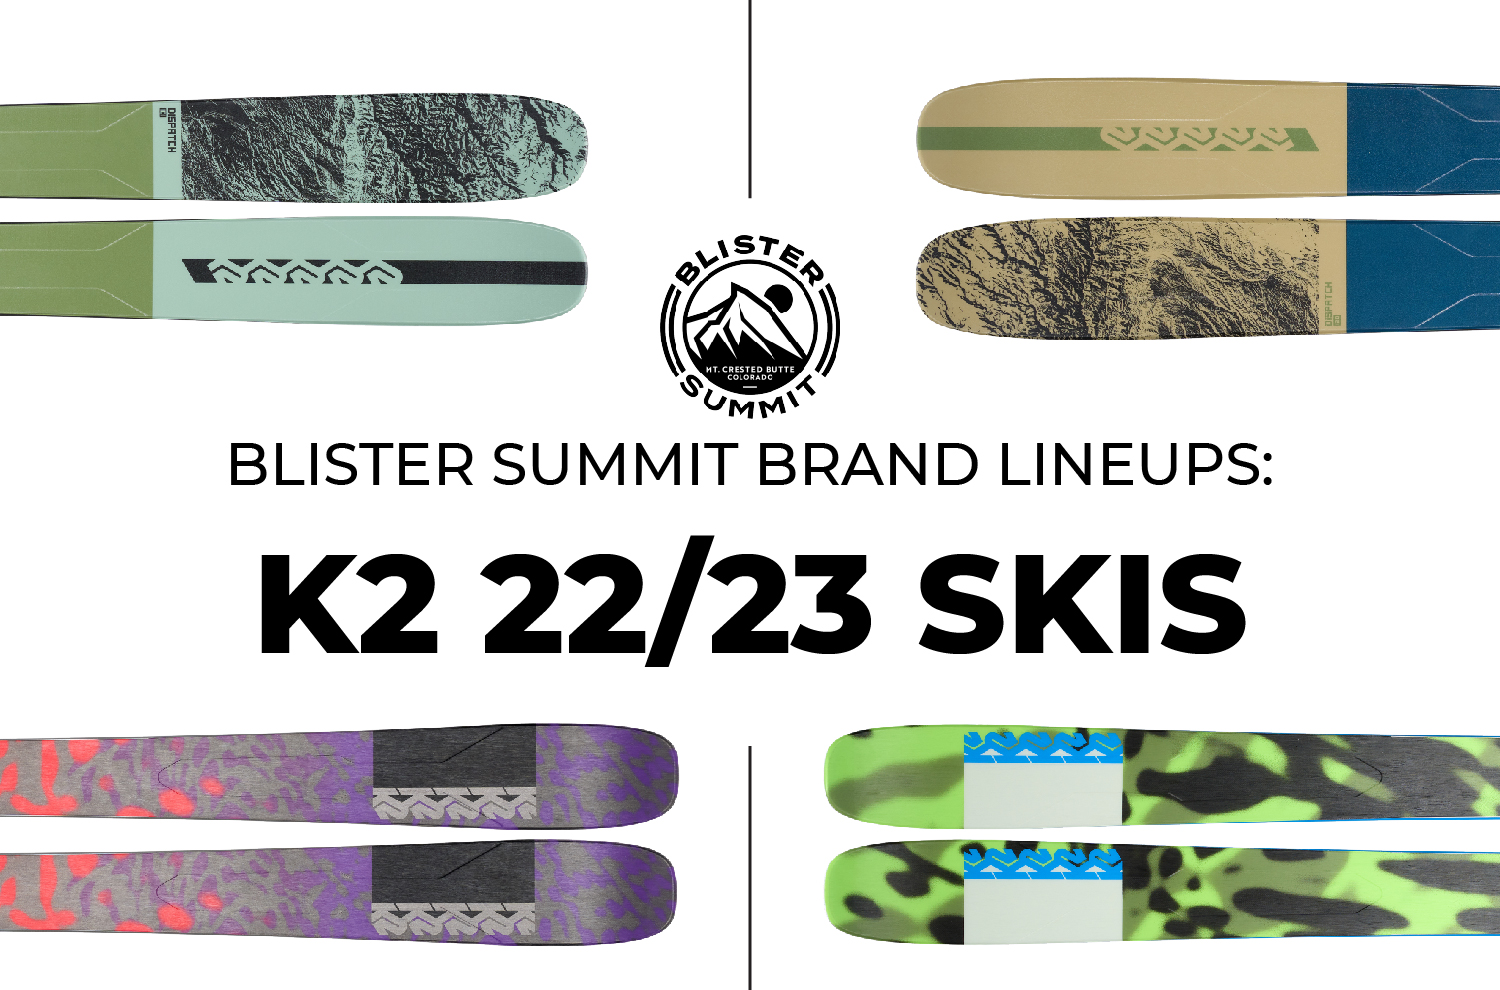 We sat down with K2's head ski designer, Jed Yeiser, to go into the weeds on several of the new skis they're releasing for the 2022-2023 season, including the all-new lightweight freeride Dispatch series, as well as their overhauled metal-laminate freeride Mindbender Ti series, each of which feature some very interesting new tech.